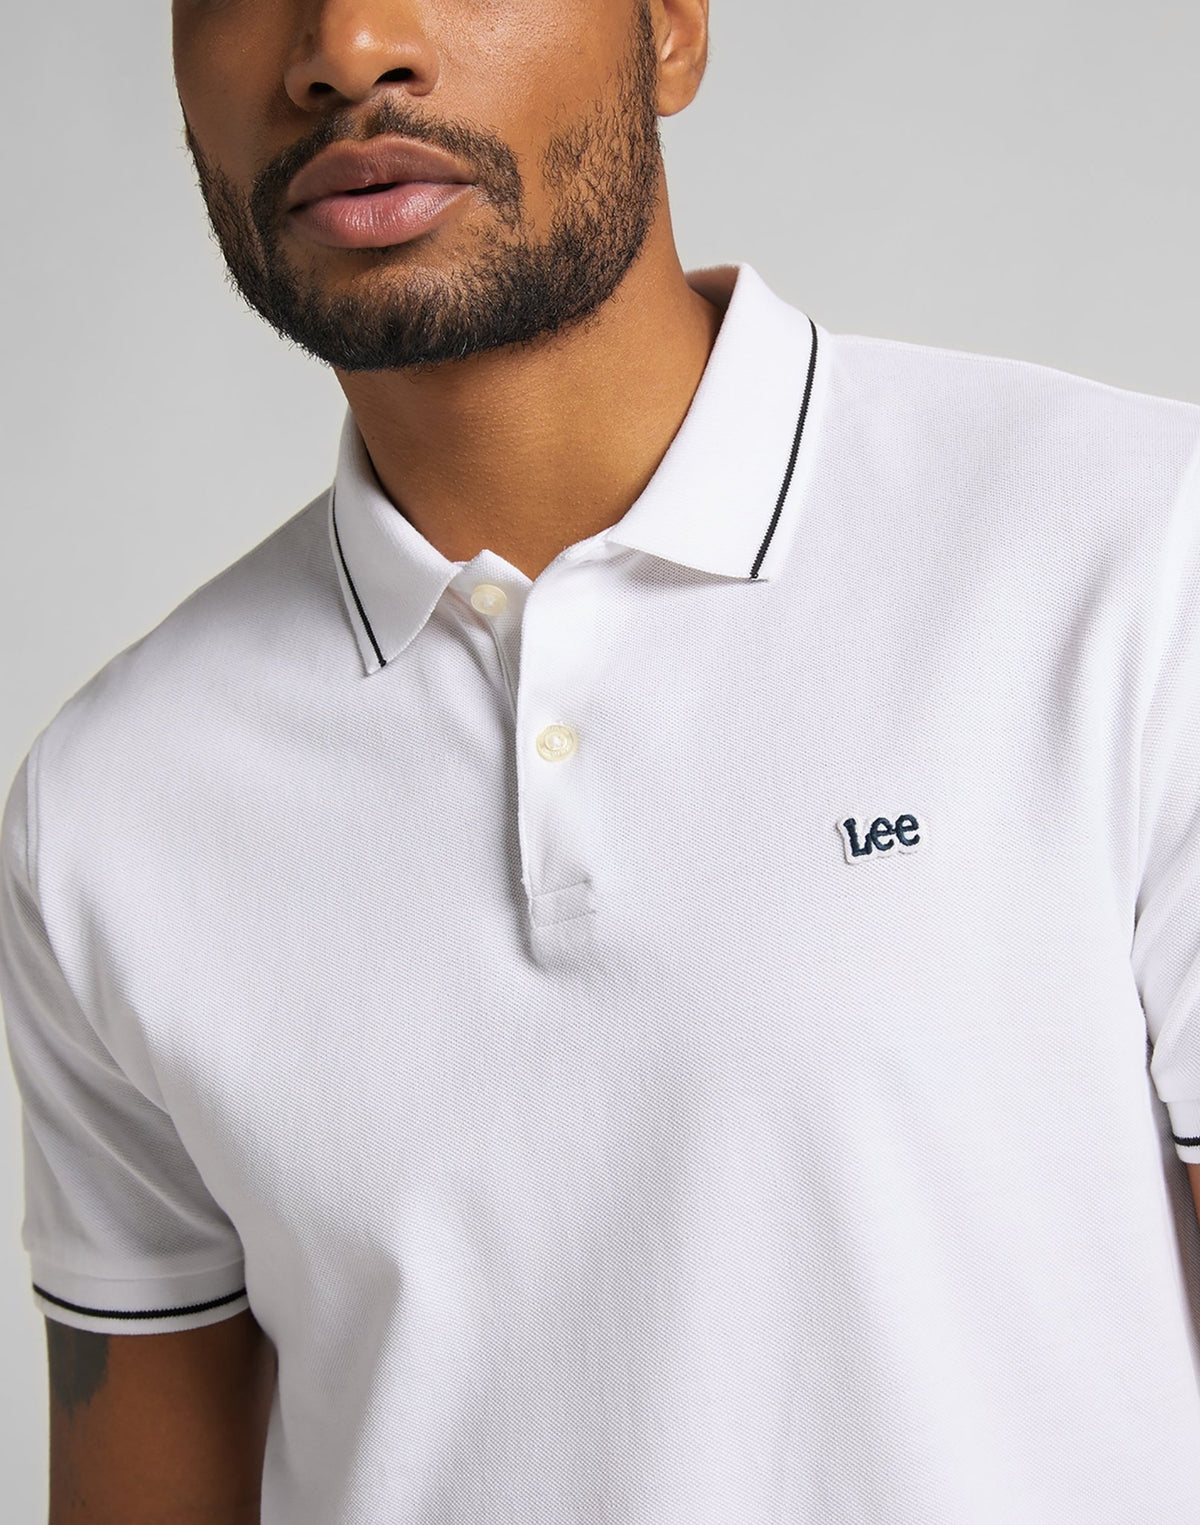 Polos - Pique Polo in Bright White - LEE Switzerland